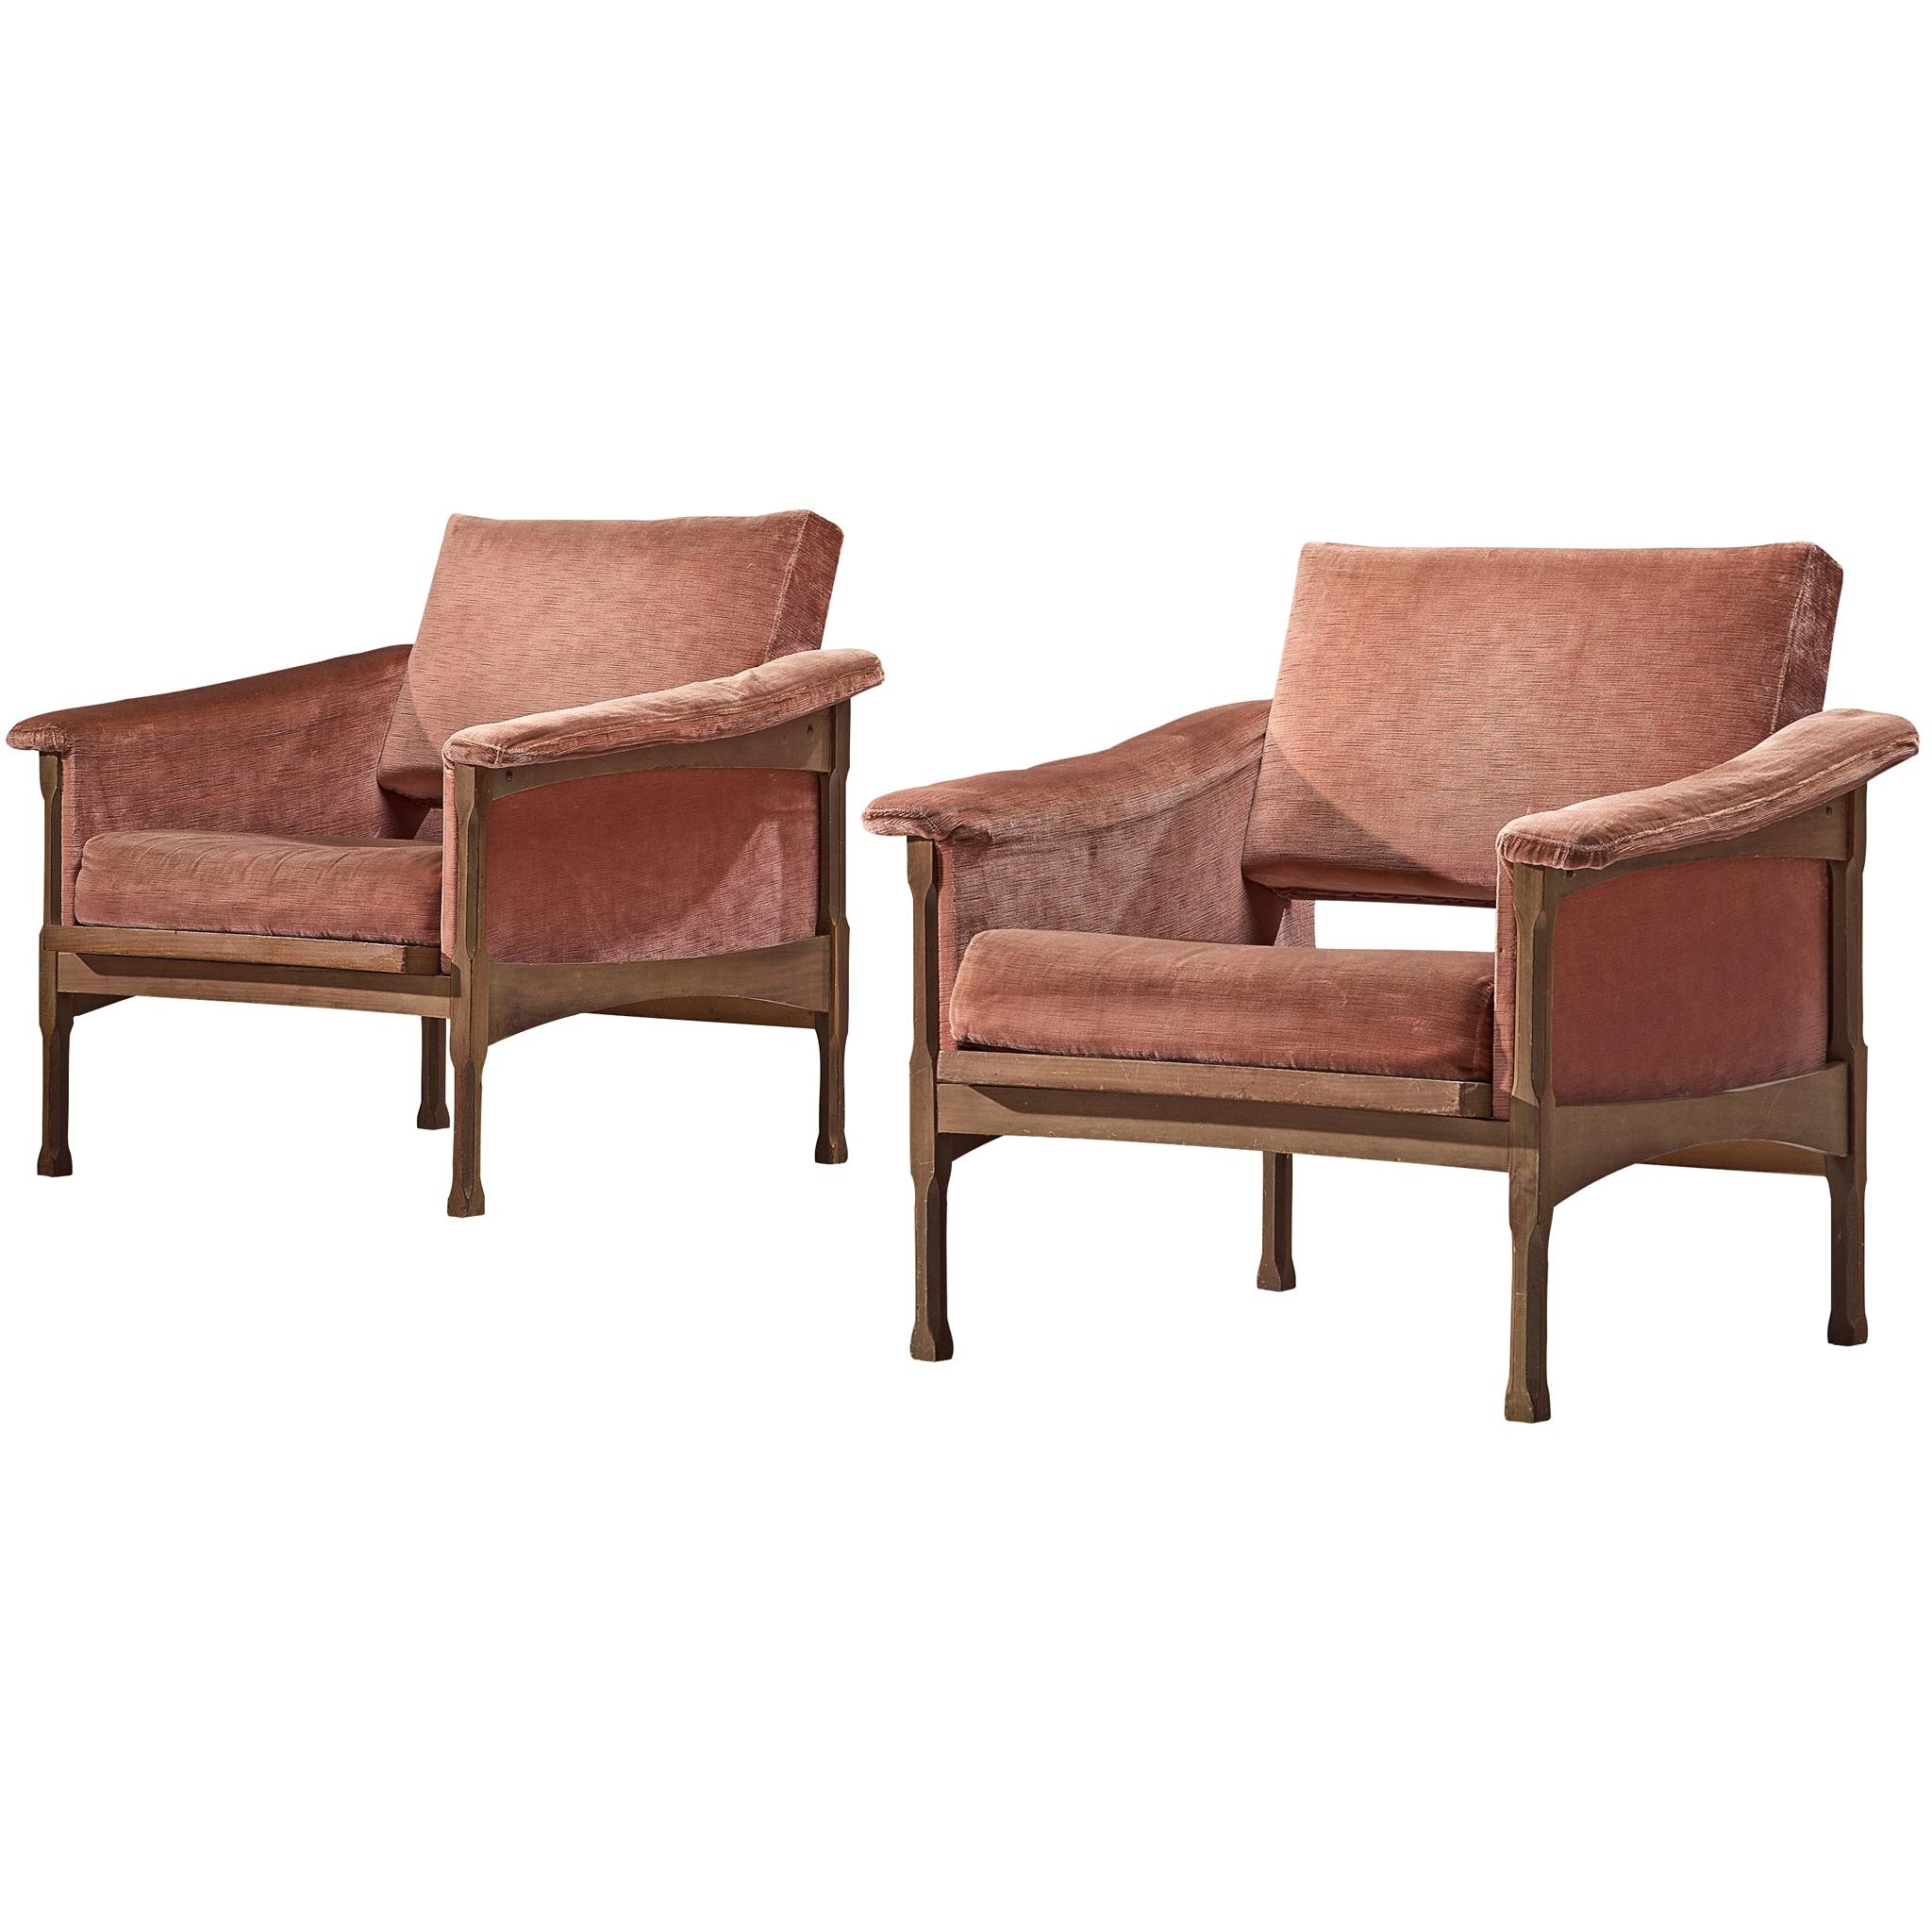 Italian Pair of Lounge Chairs in Pink Velvet